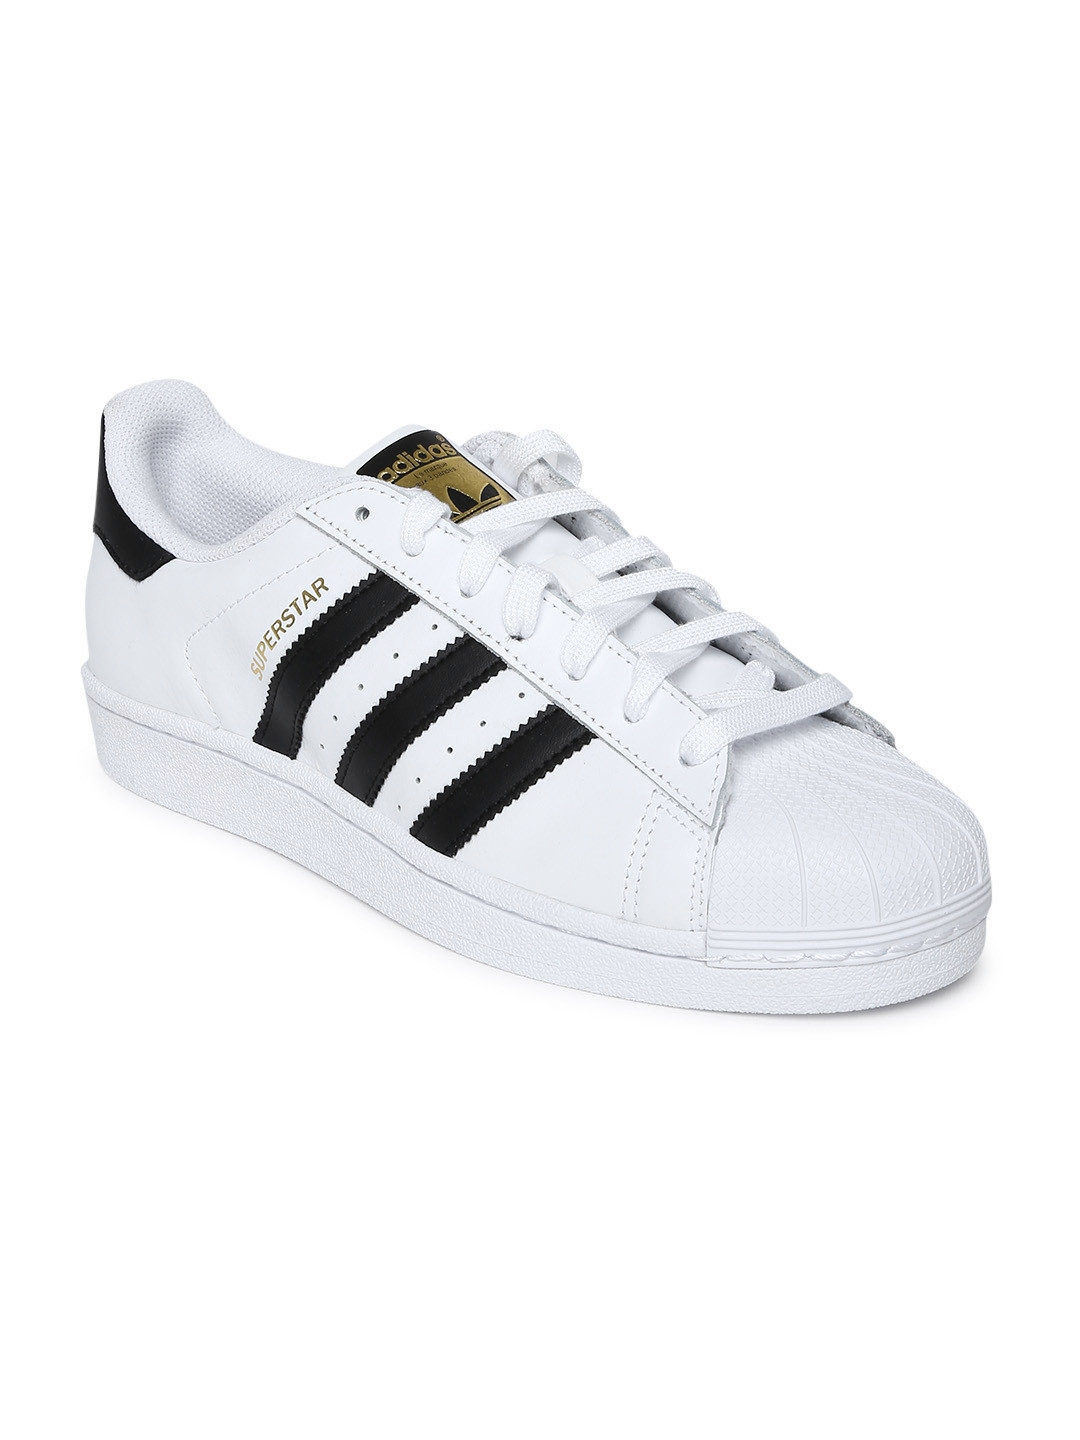 Buy ADIDAS Originals Men White Superstar Leather Casual Shoes - Casual ...